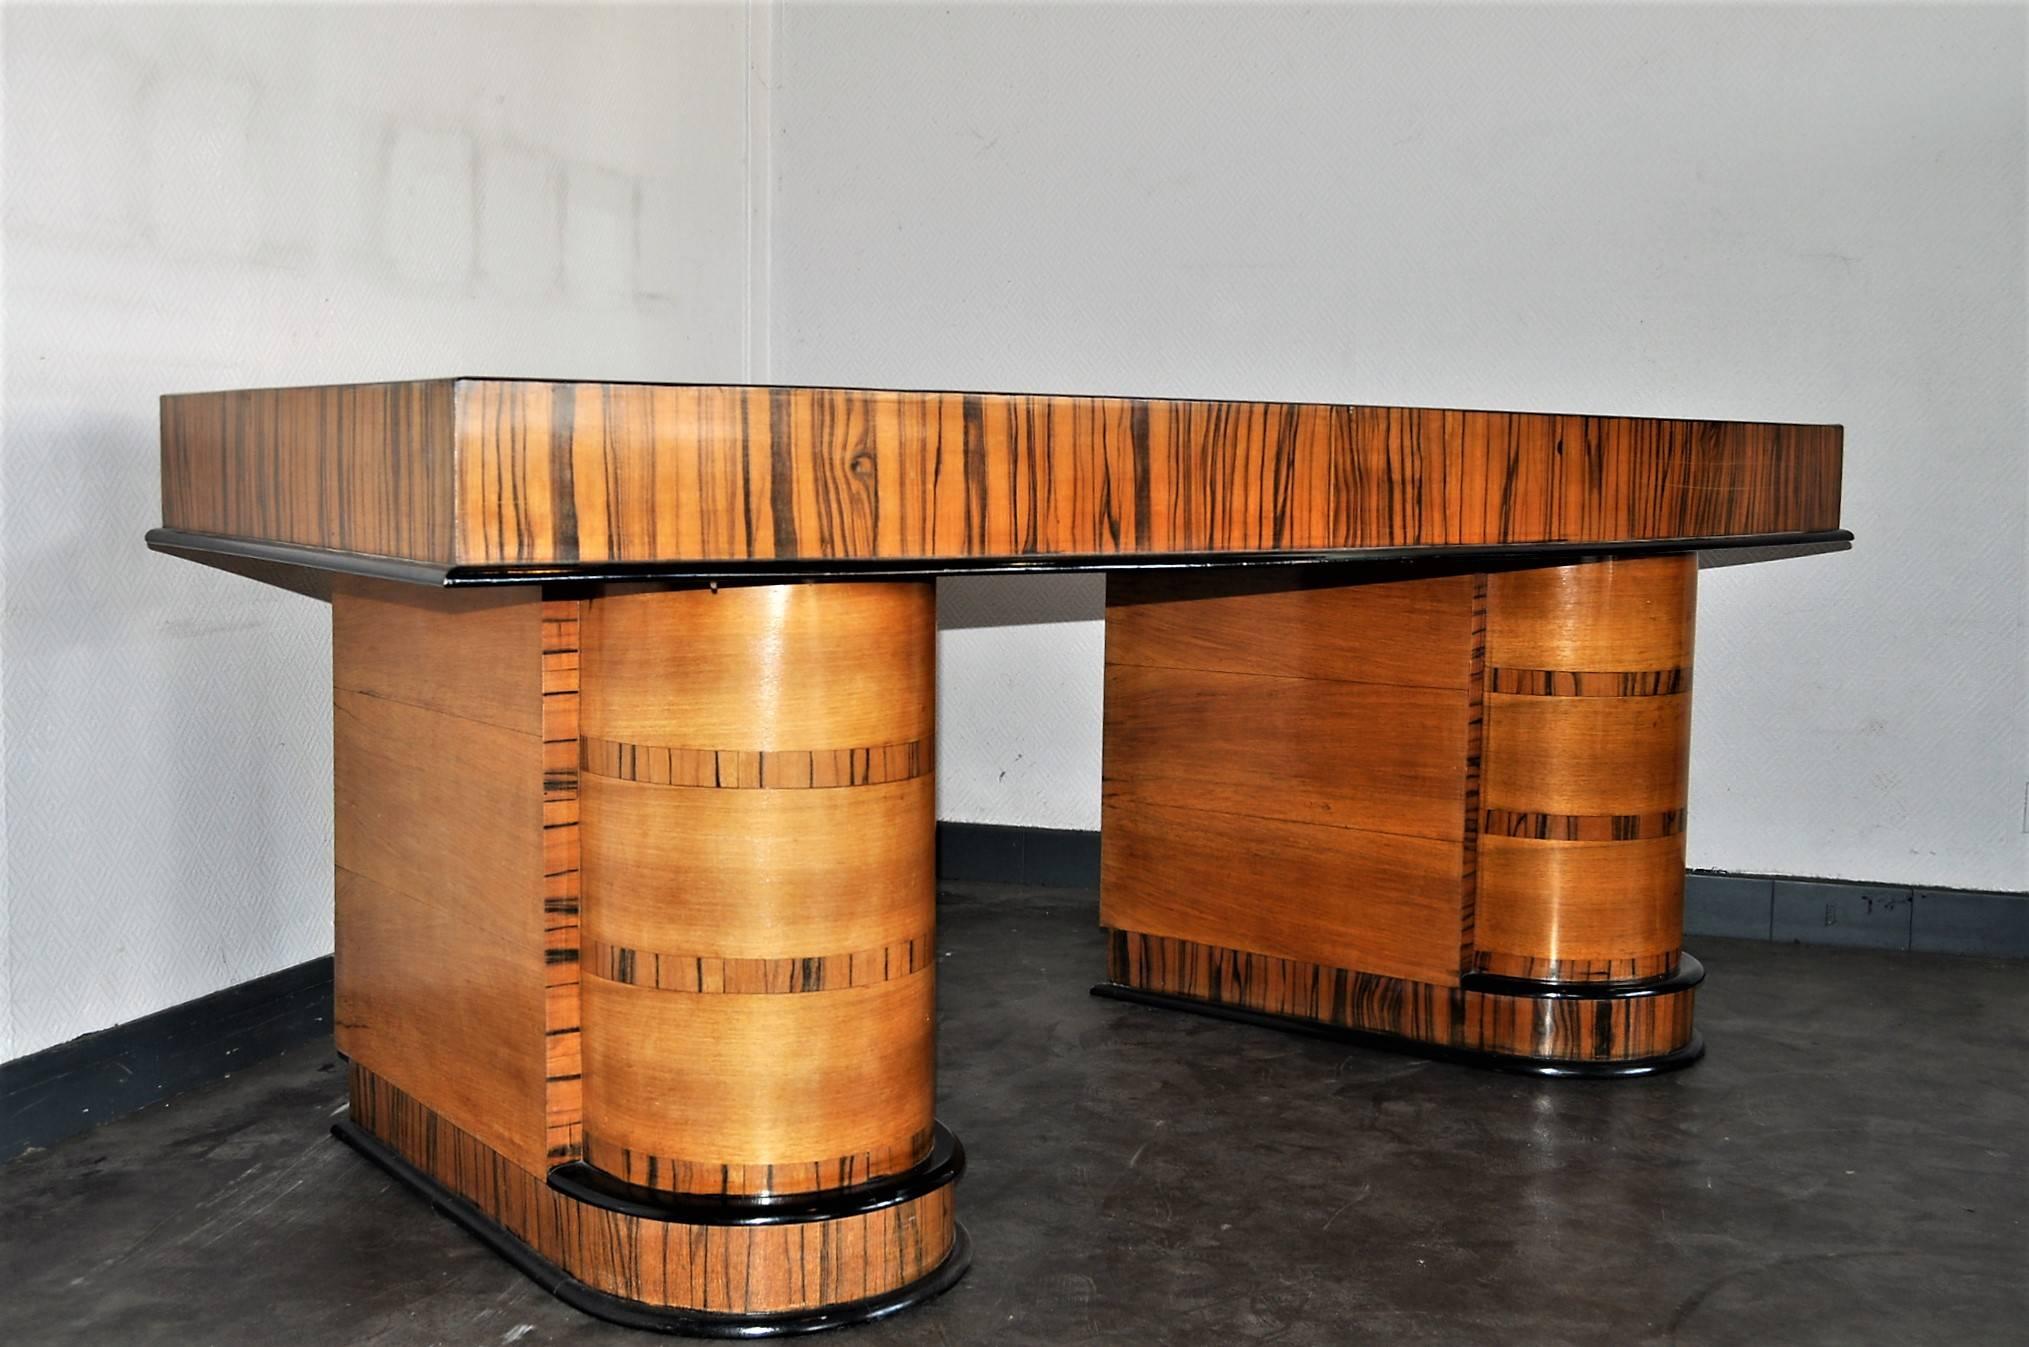 Rare and gorgeous original French Art Deco office set attributed to André Domin (1883-1962) and Marcel Genevriere (1885-1967).
Composed by four items:
An impressive large size writing desk table in Macassar wood, blackened glass top, three drawers